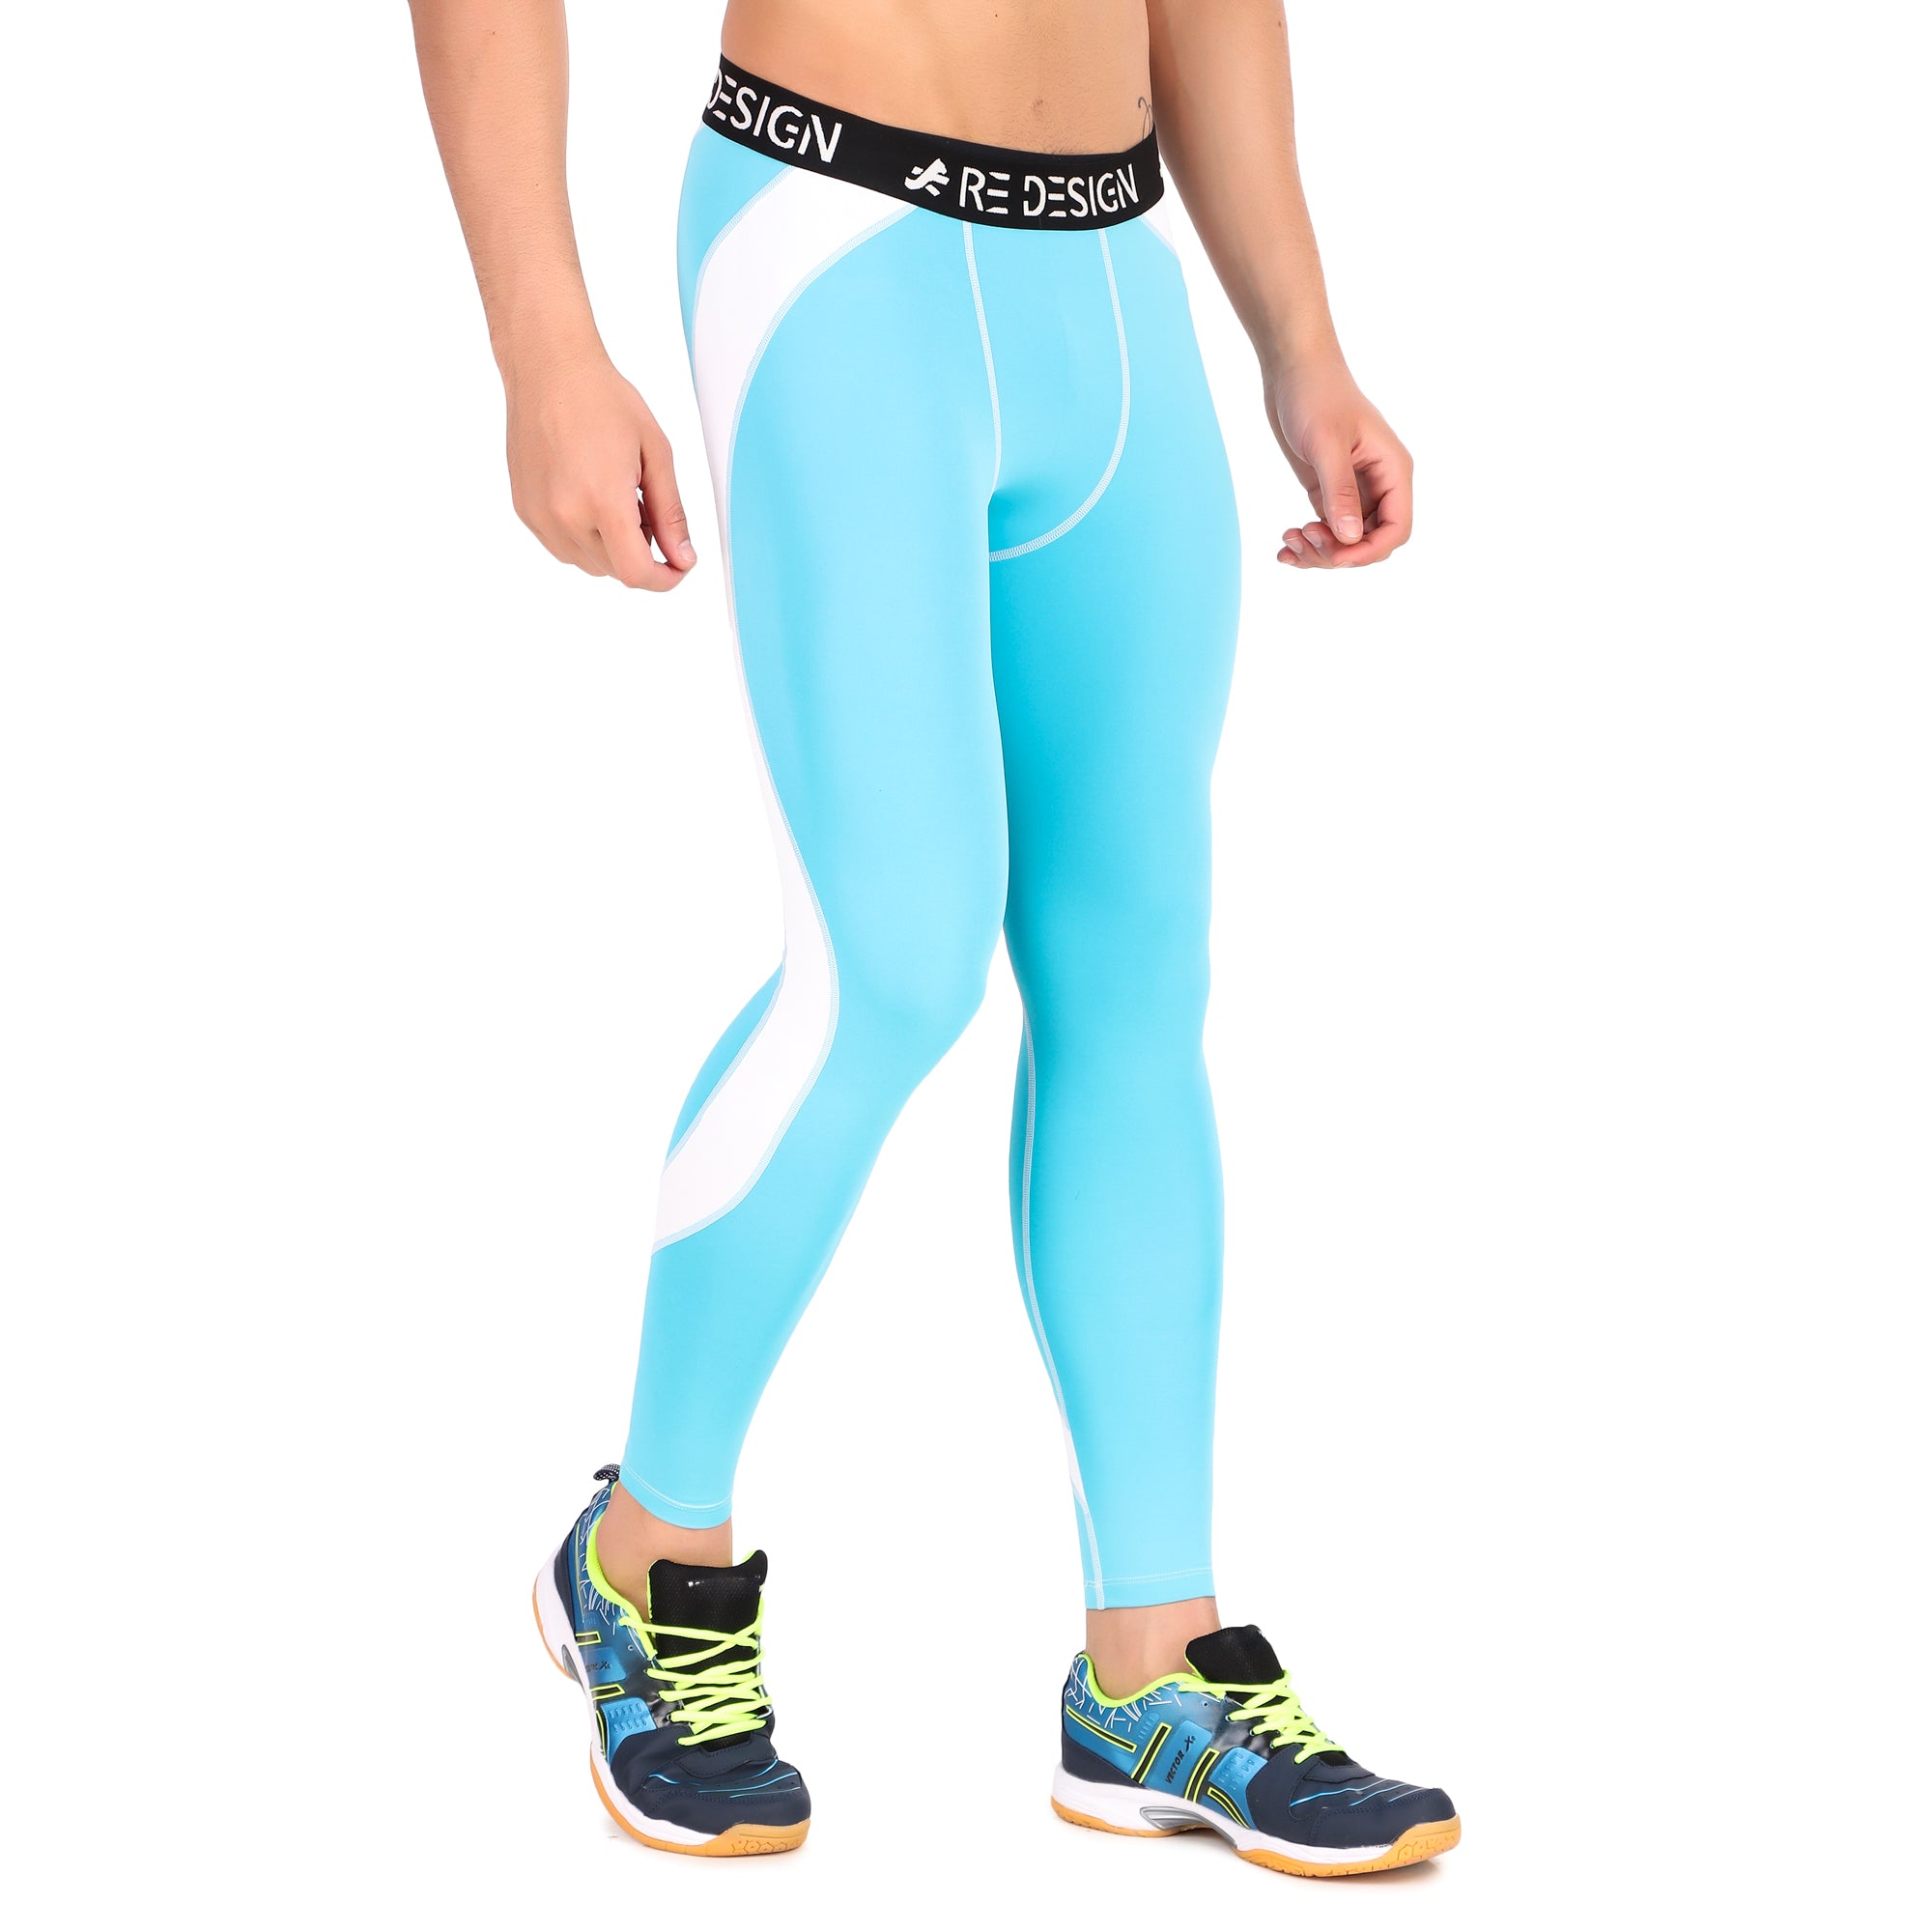 Men's Polyester Compression Pant and Full Tights (Aqua/White)